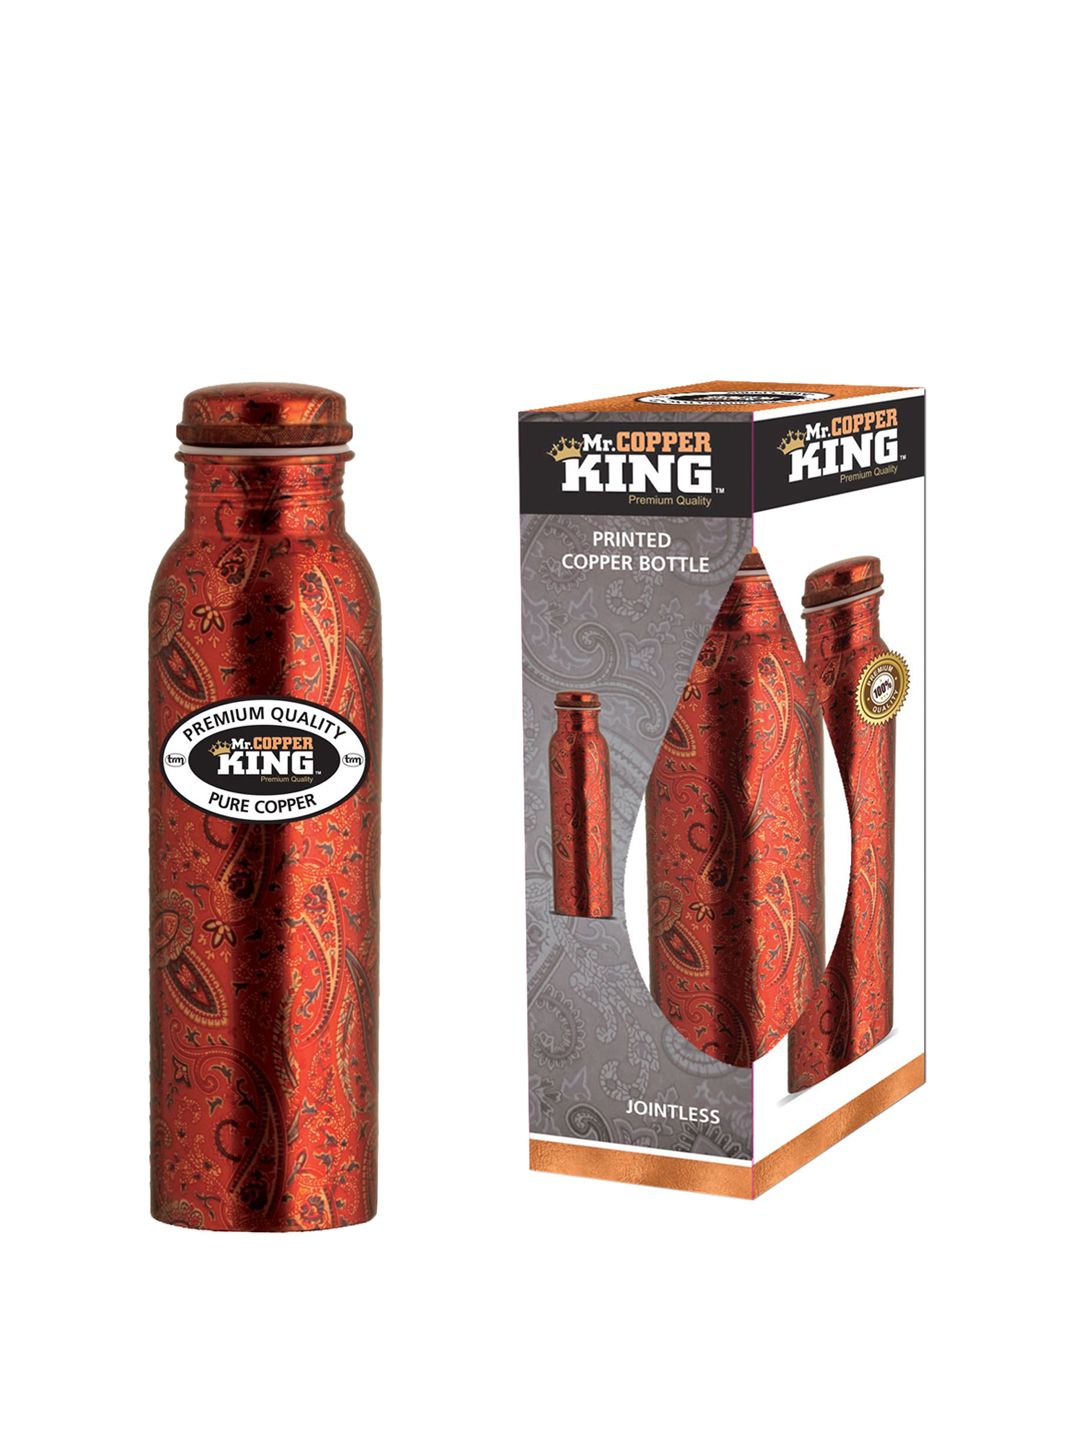 MR. COPPER KING Maroon Royal Printed Copper Bottle 950ml Price in India